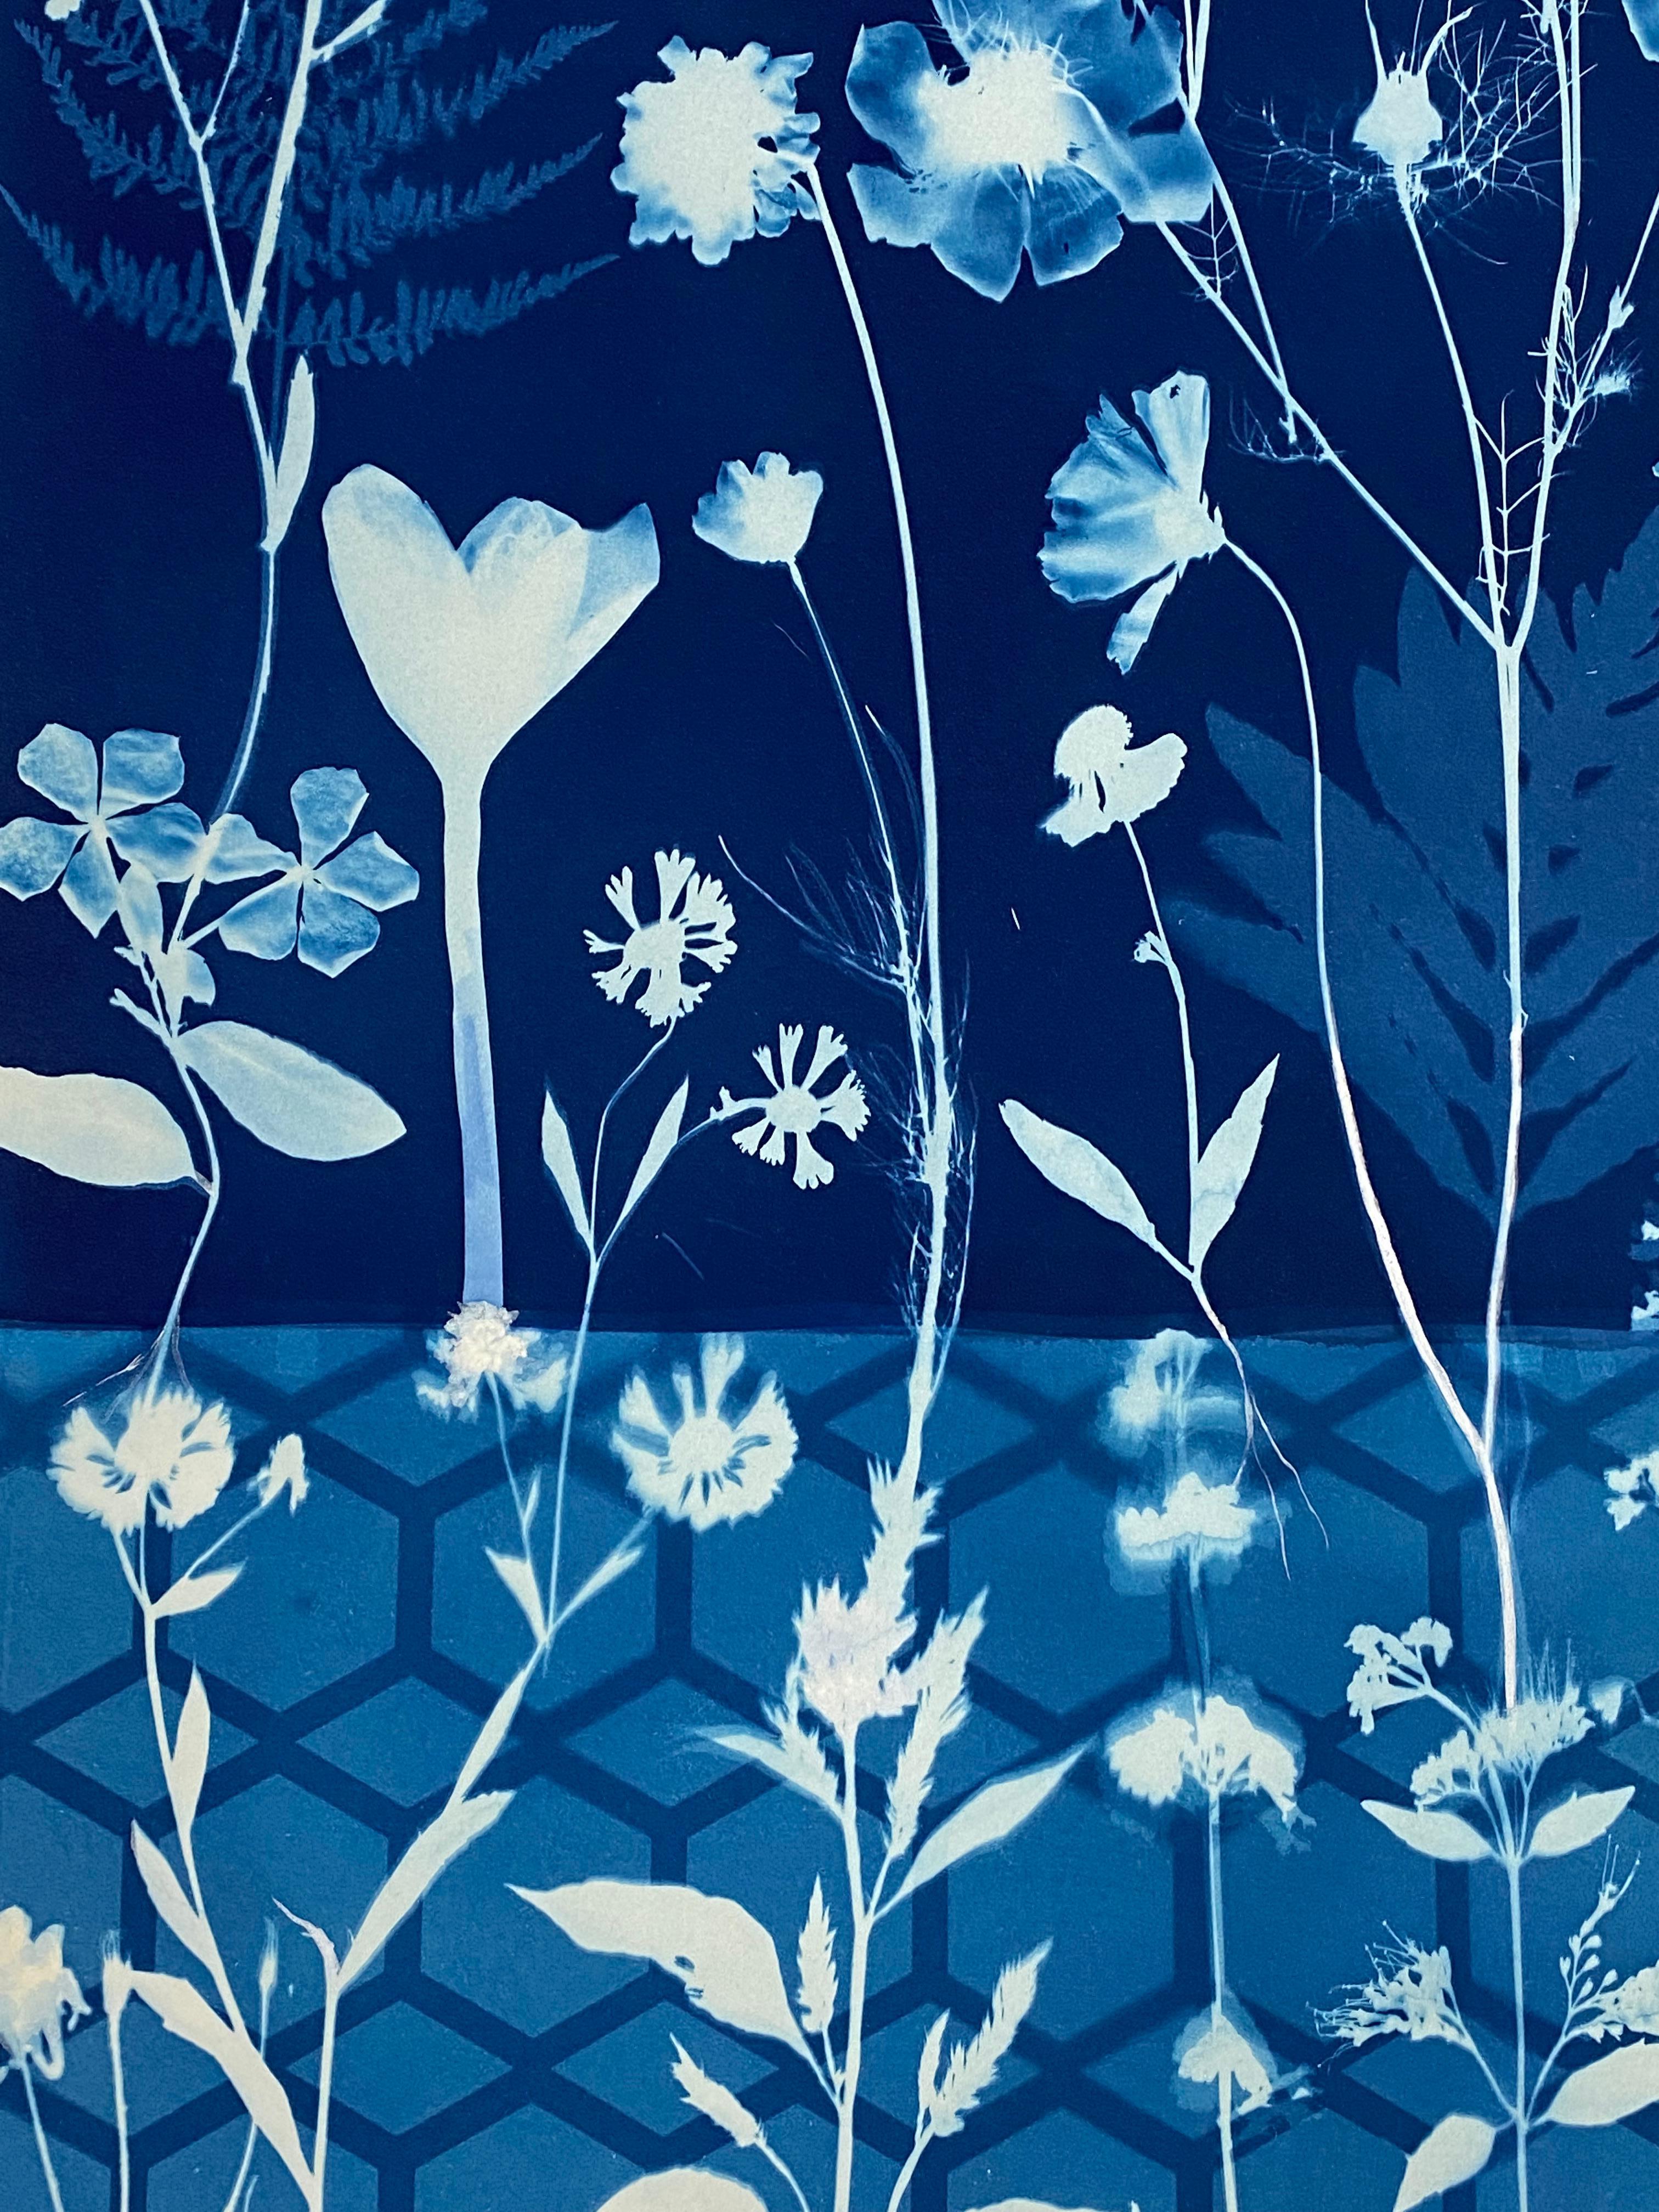 Cyanotype Painting Crocus, Star Flower, Cosmos, Ferns, Botanical Painting, Blue For Sale 3